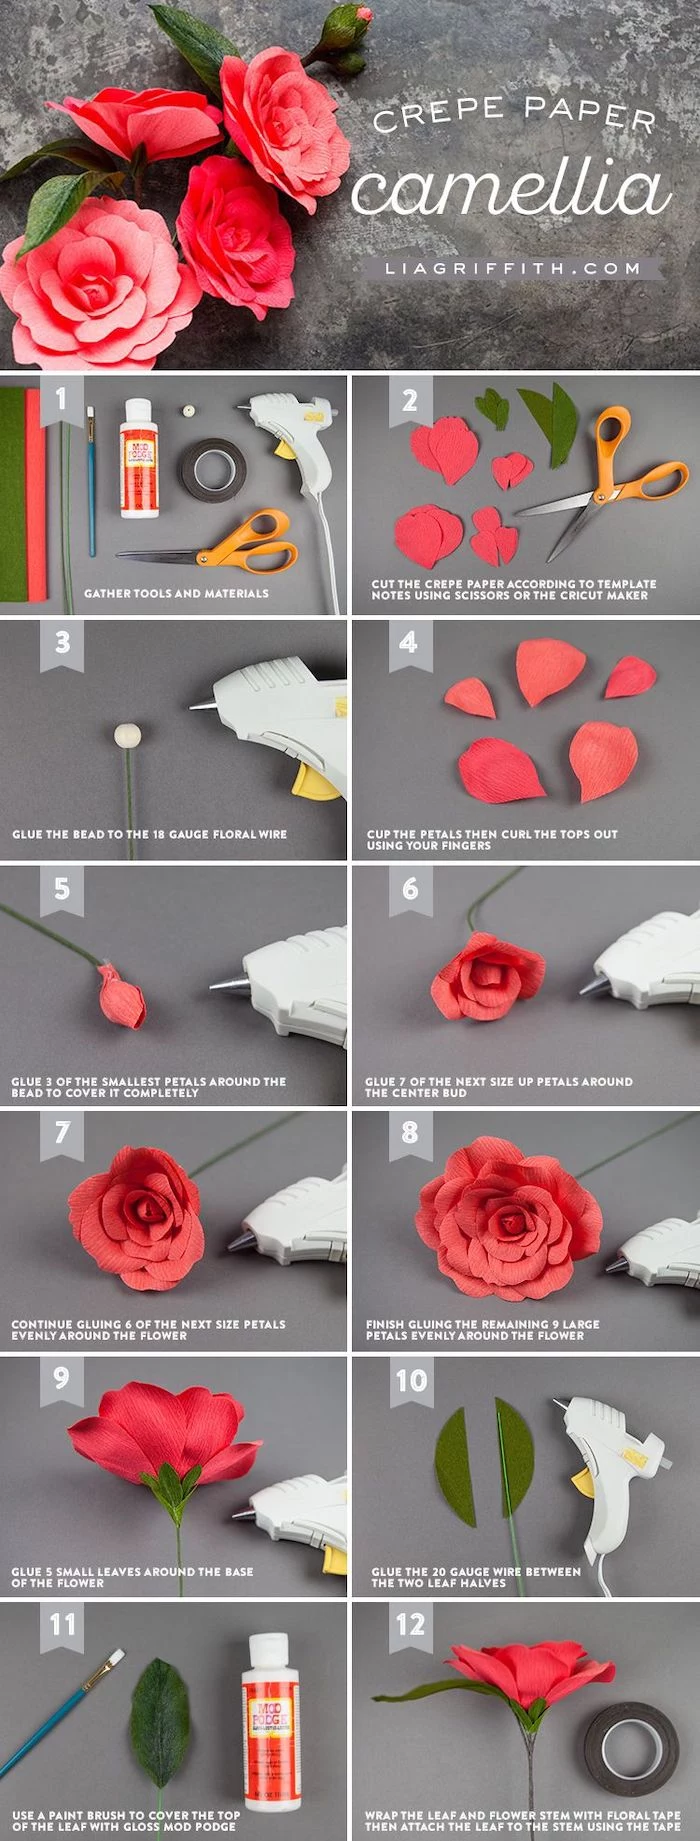 how to make flowers out of paper, how to make camellia flower out of crepe paper, photo collage of step by step diy tutorial